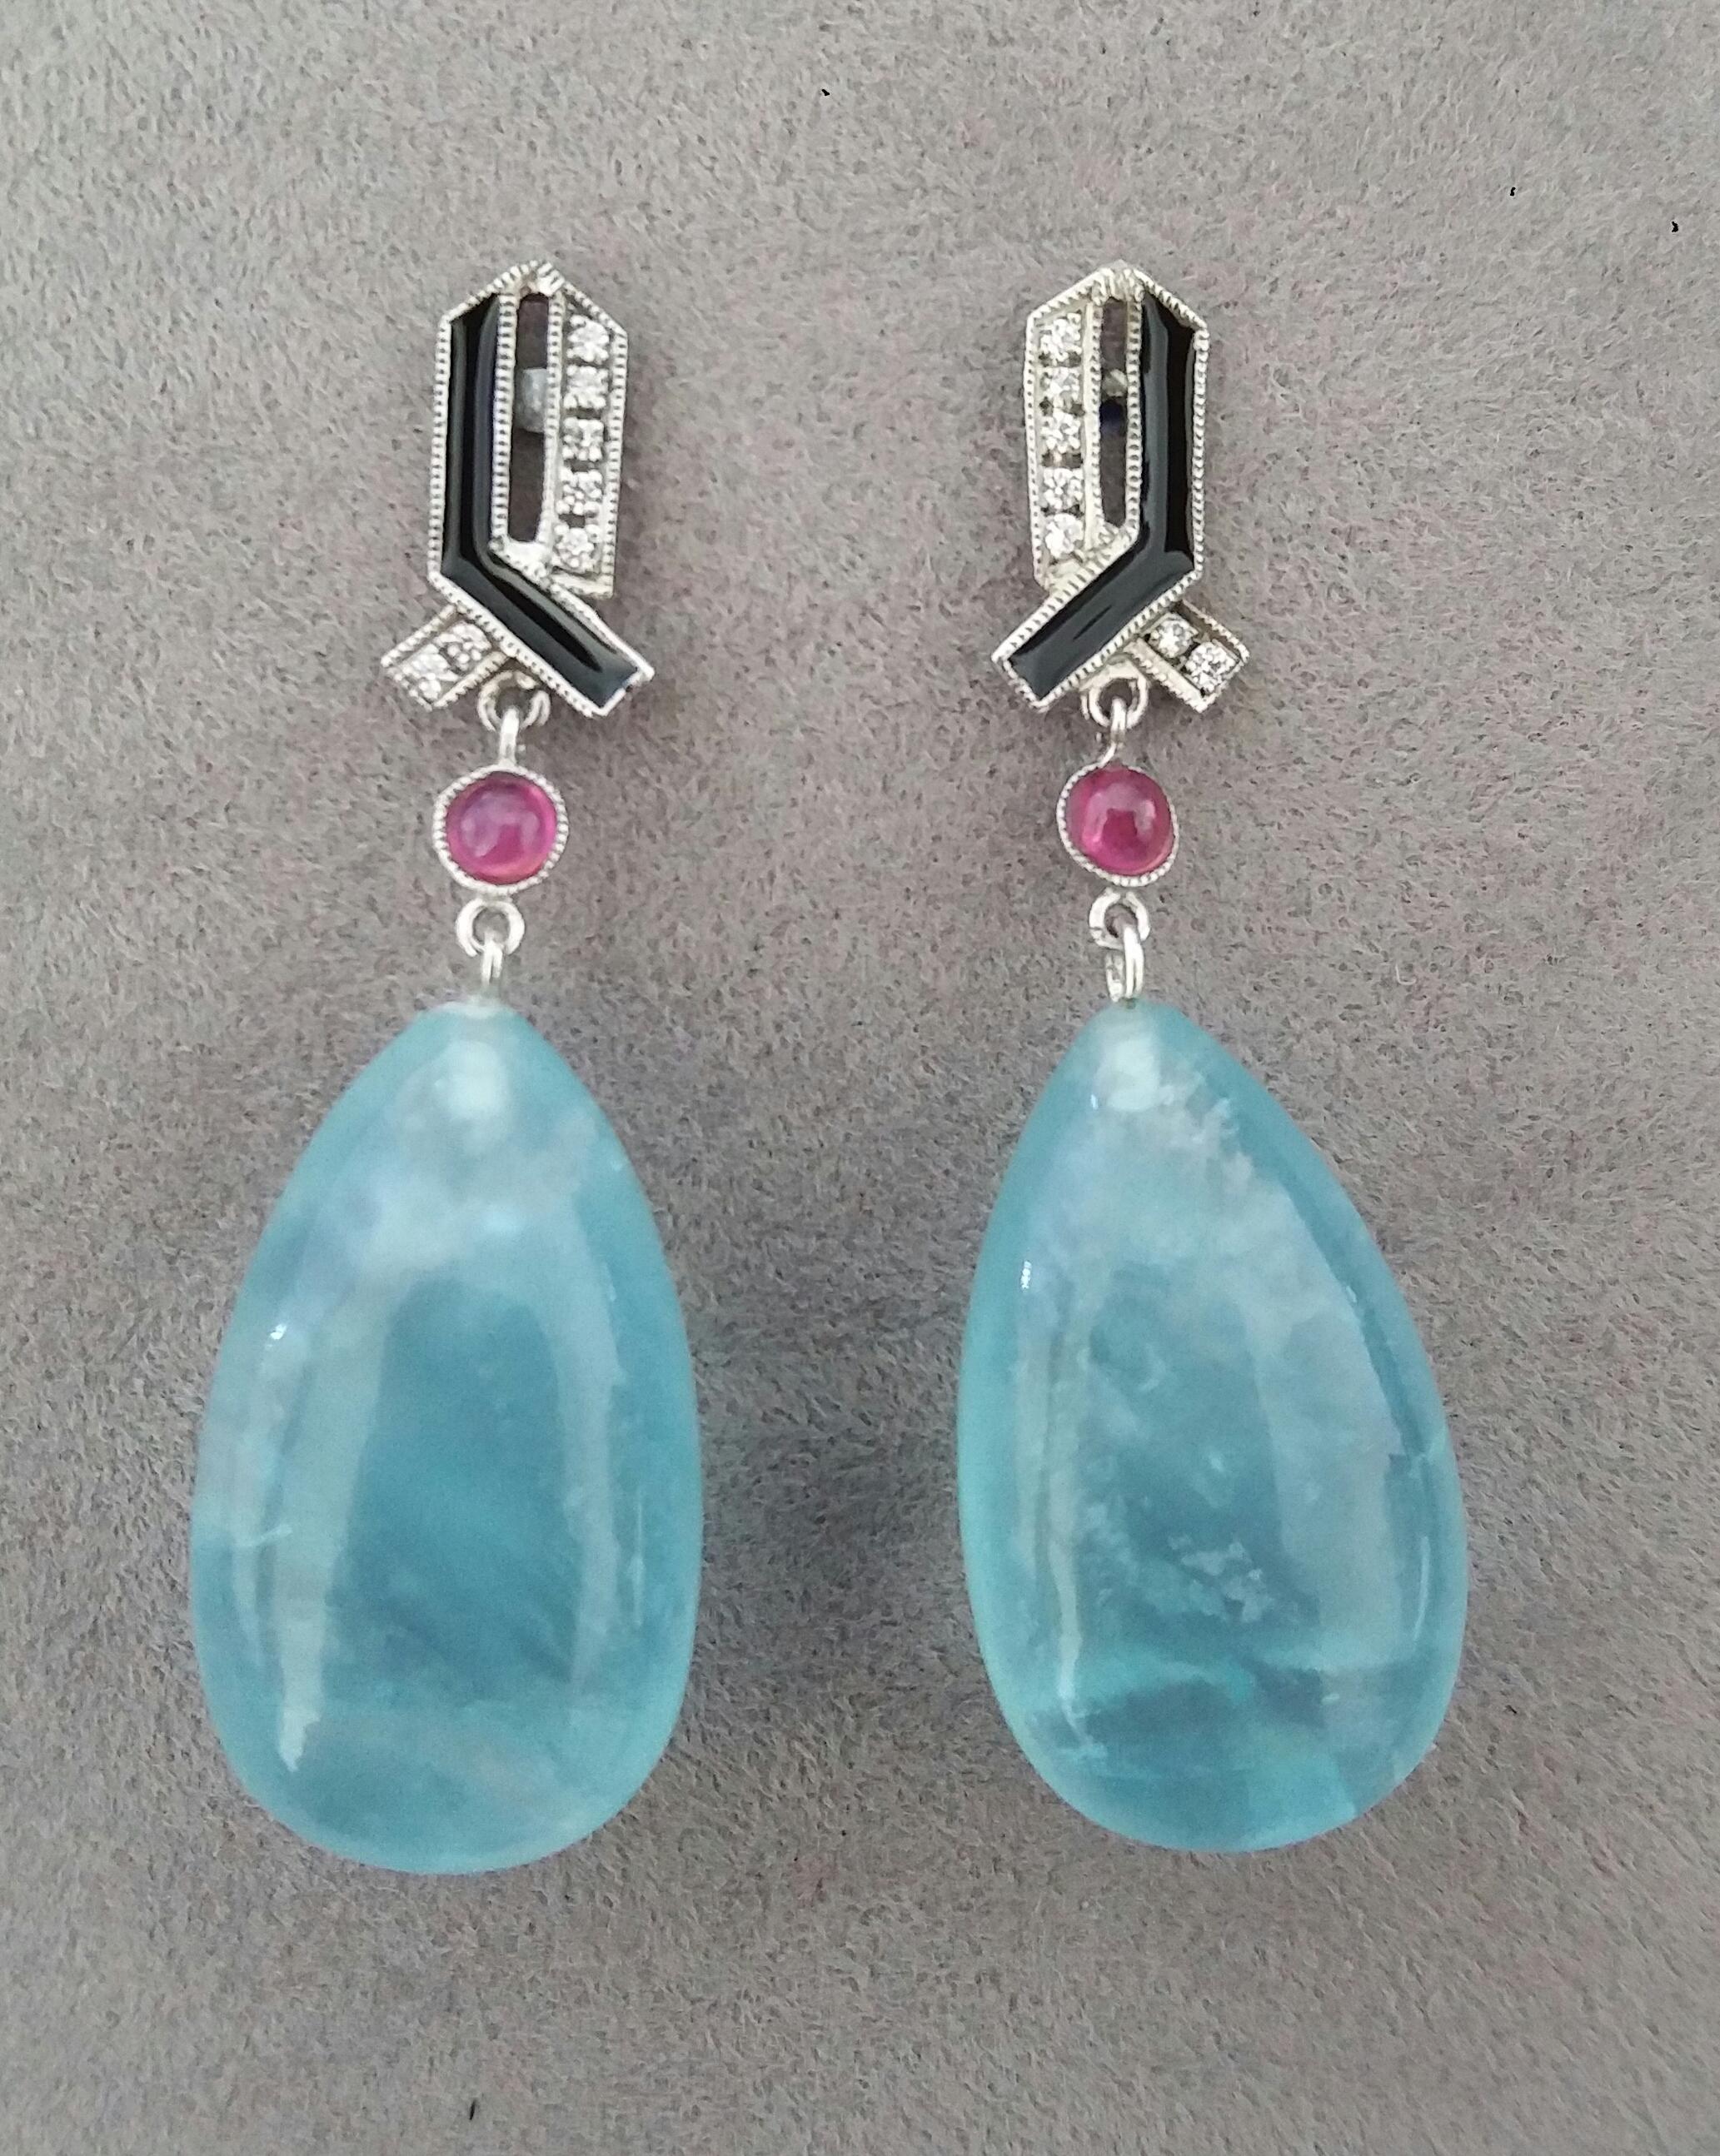 In these Art Deco Style handmade earrings 2 very good quality Natural Aquamarine plain drops measuring 14 x 23 mm. are suspended from 2 small round Ruby cabochons  and 2 white 14 kt gold tops  with 16 full cut round diamonds and blue Enamels.

In